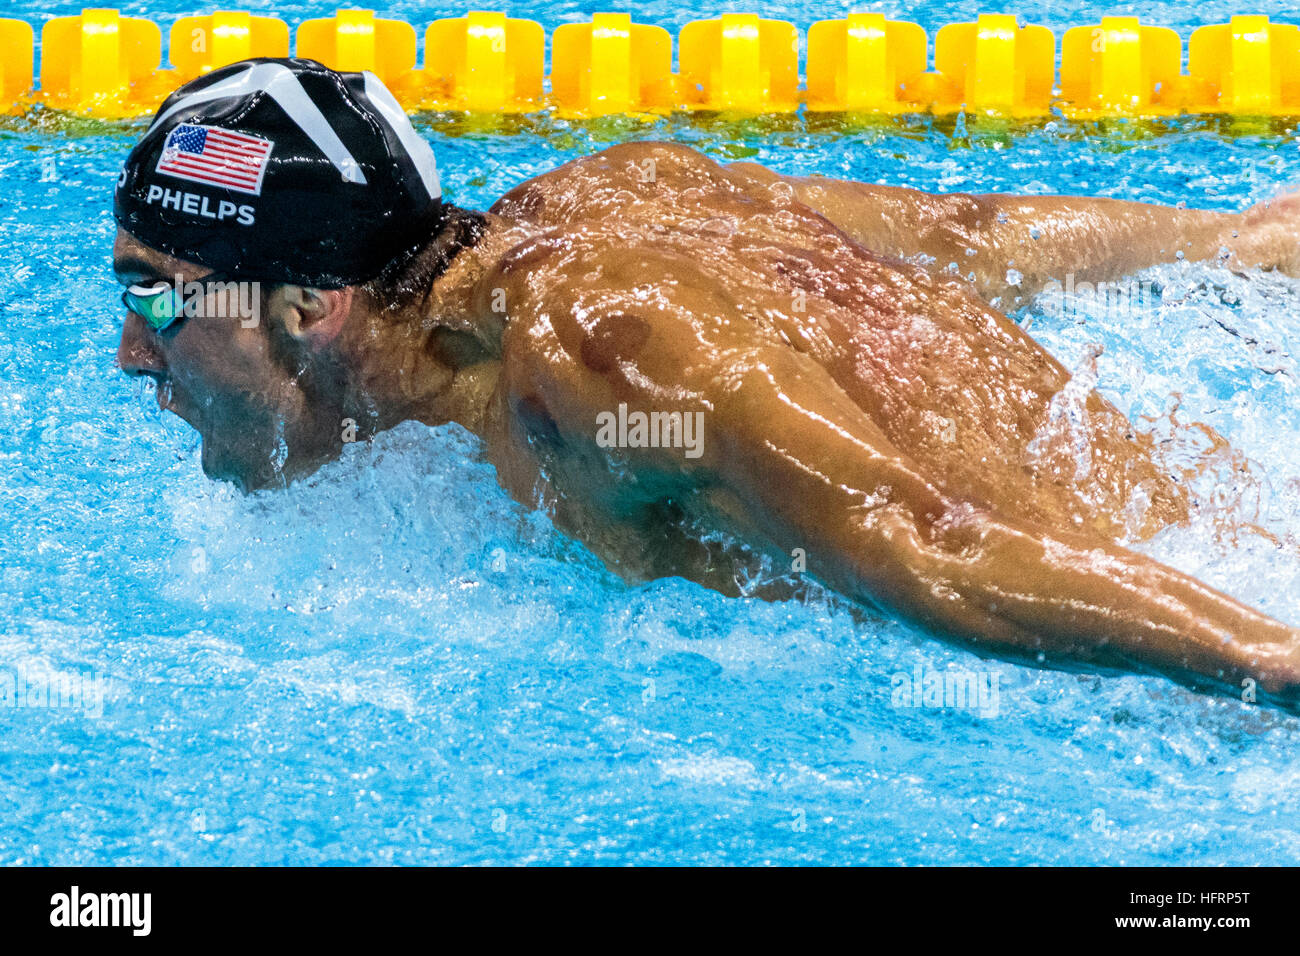 Rio de Janeiro, Brazil. 9 August 2016.   Michael Phelps (USA) the gold medal winner competing in the final of the Men's 200m butterfly at the 2016 Oly Stock Photo